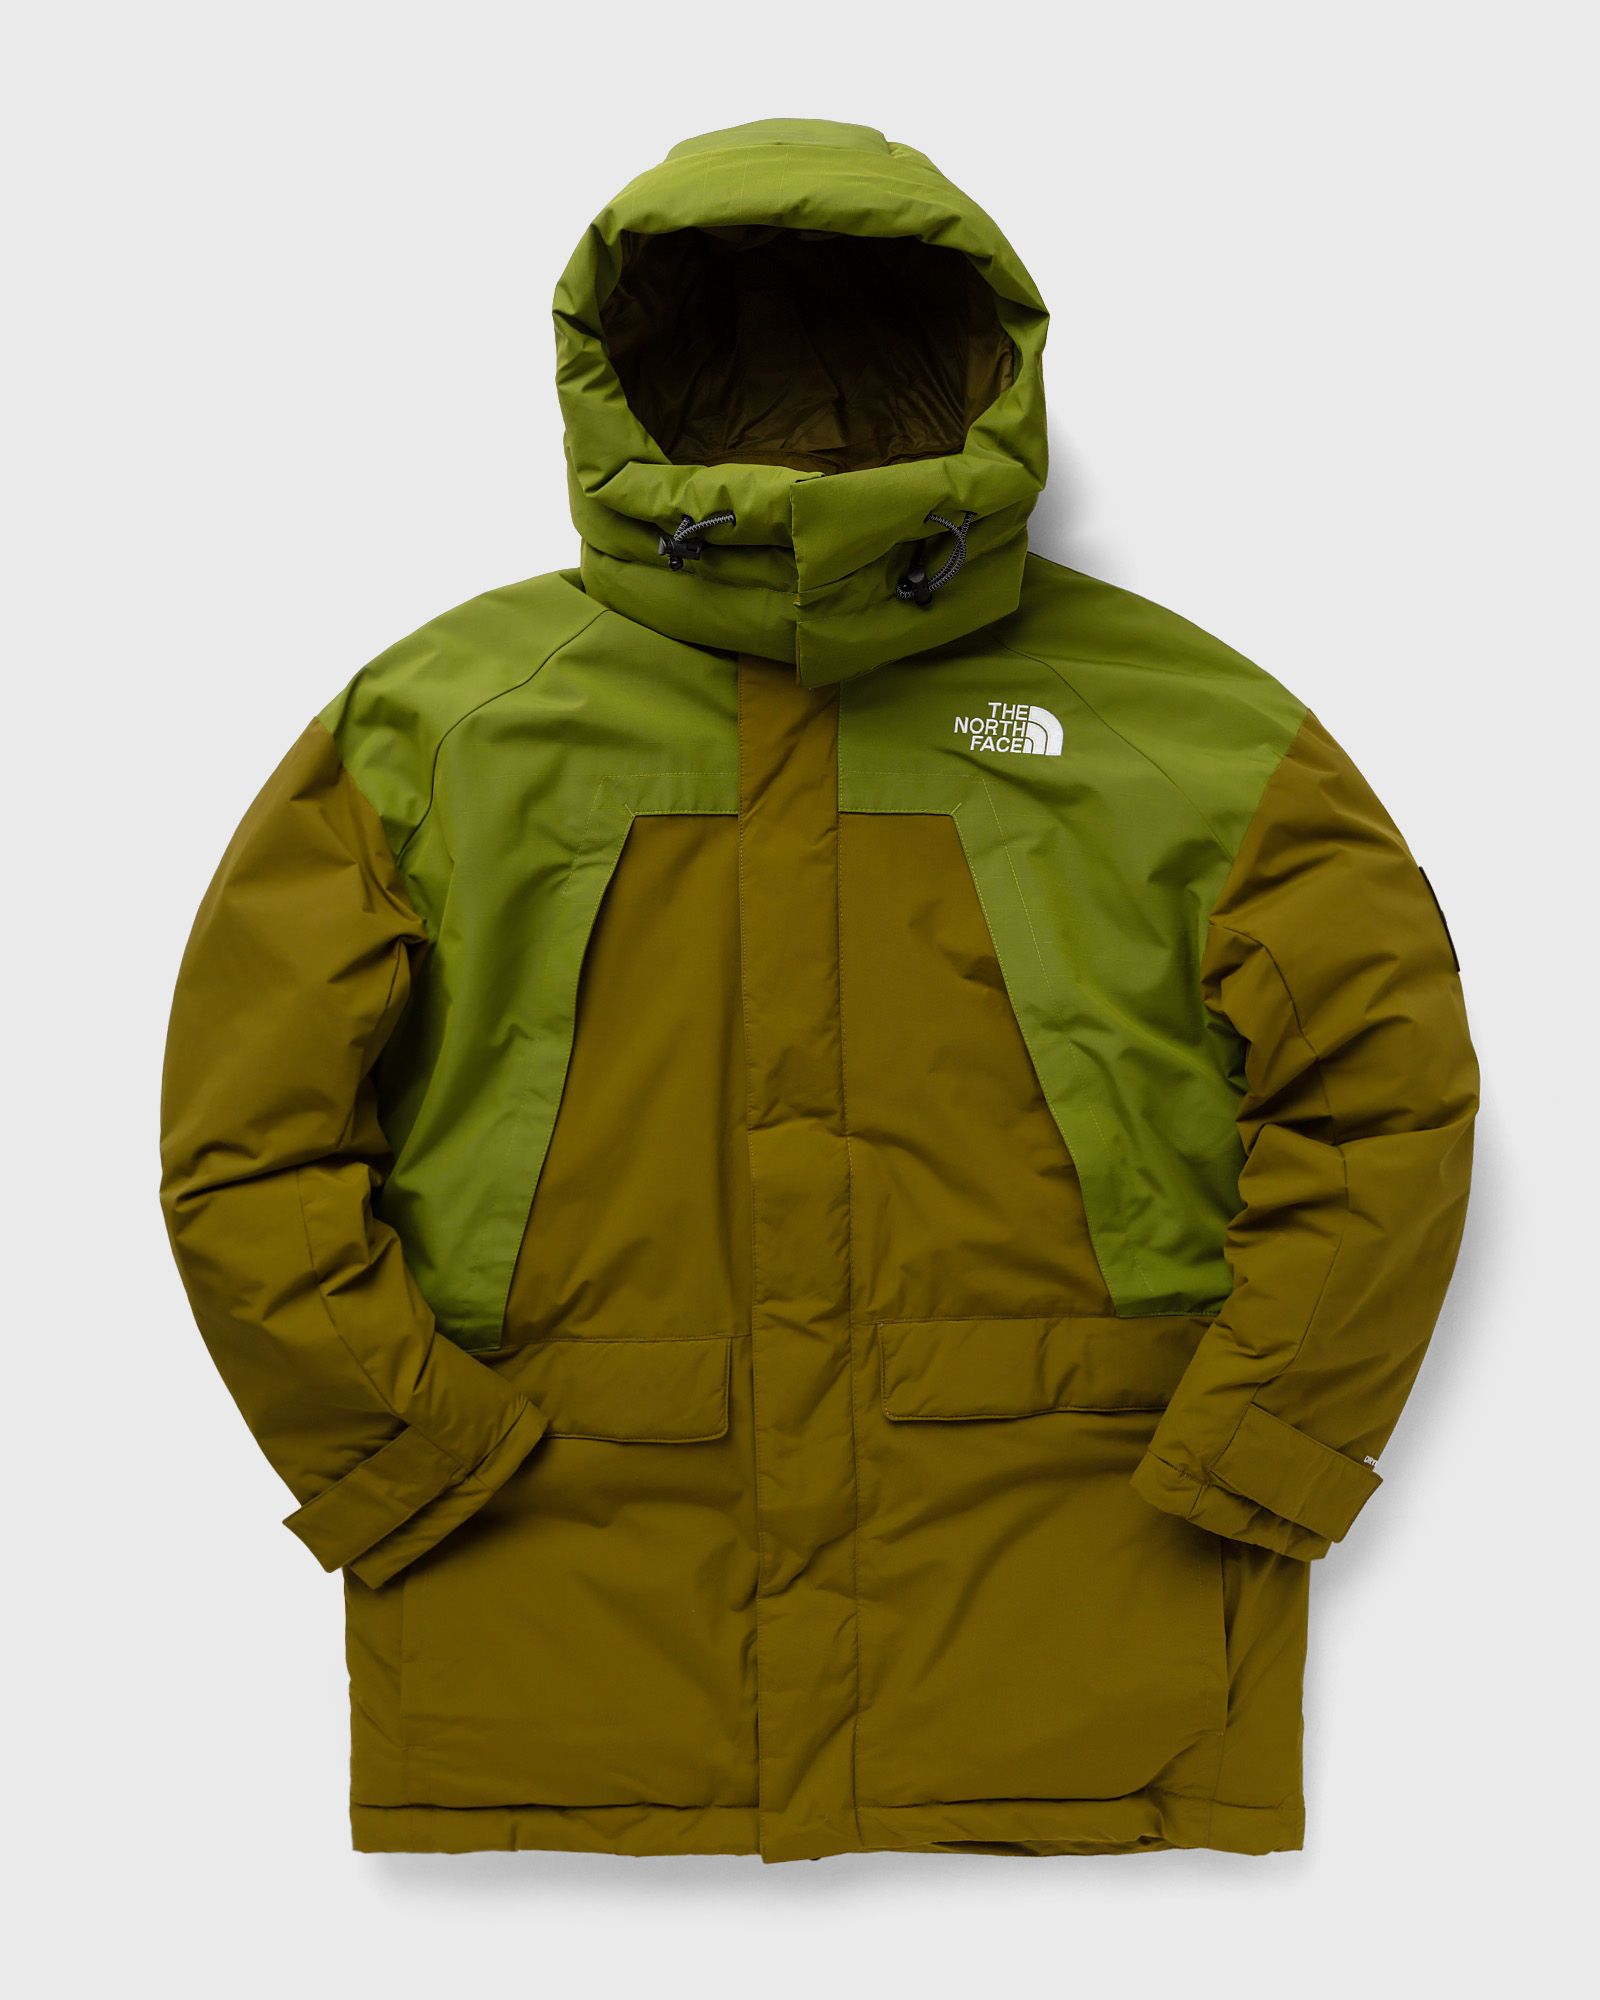 The North Face - kembar insulated parka men parkas green in größe:xl